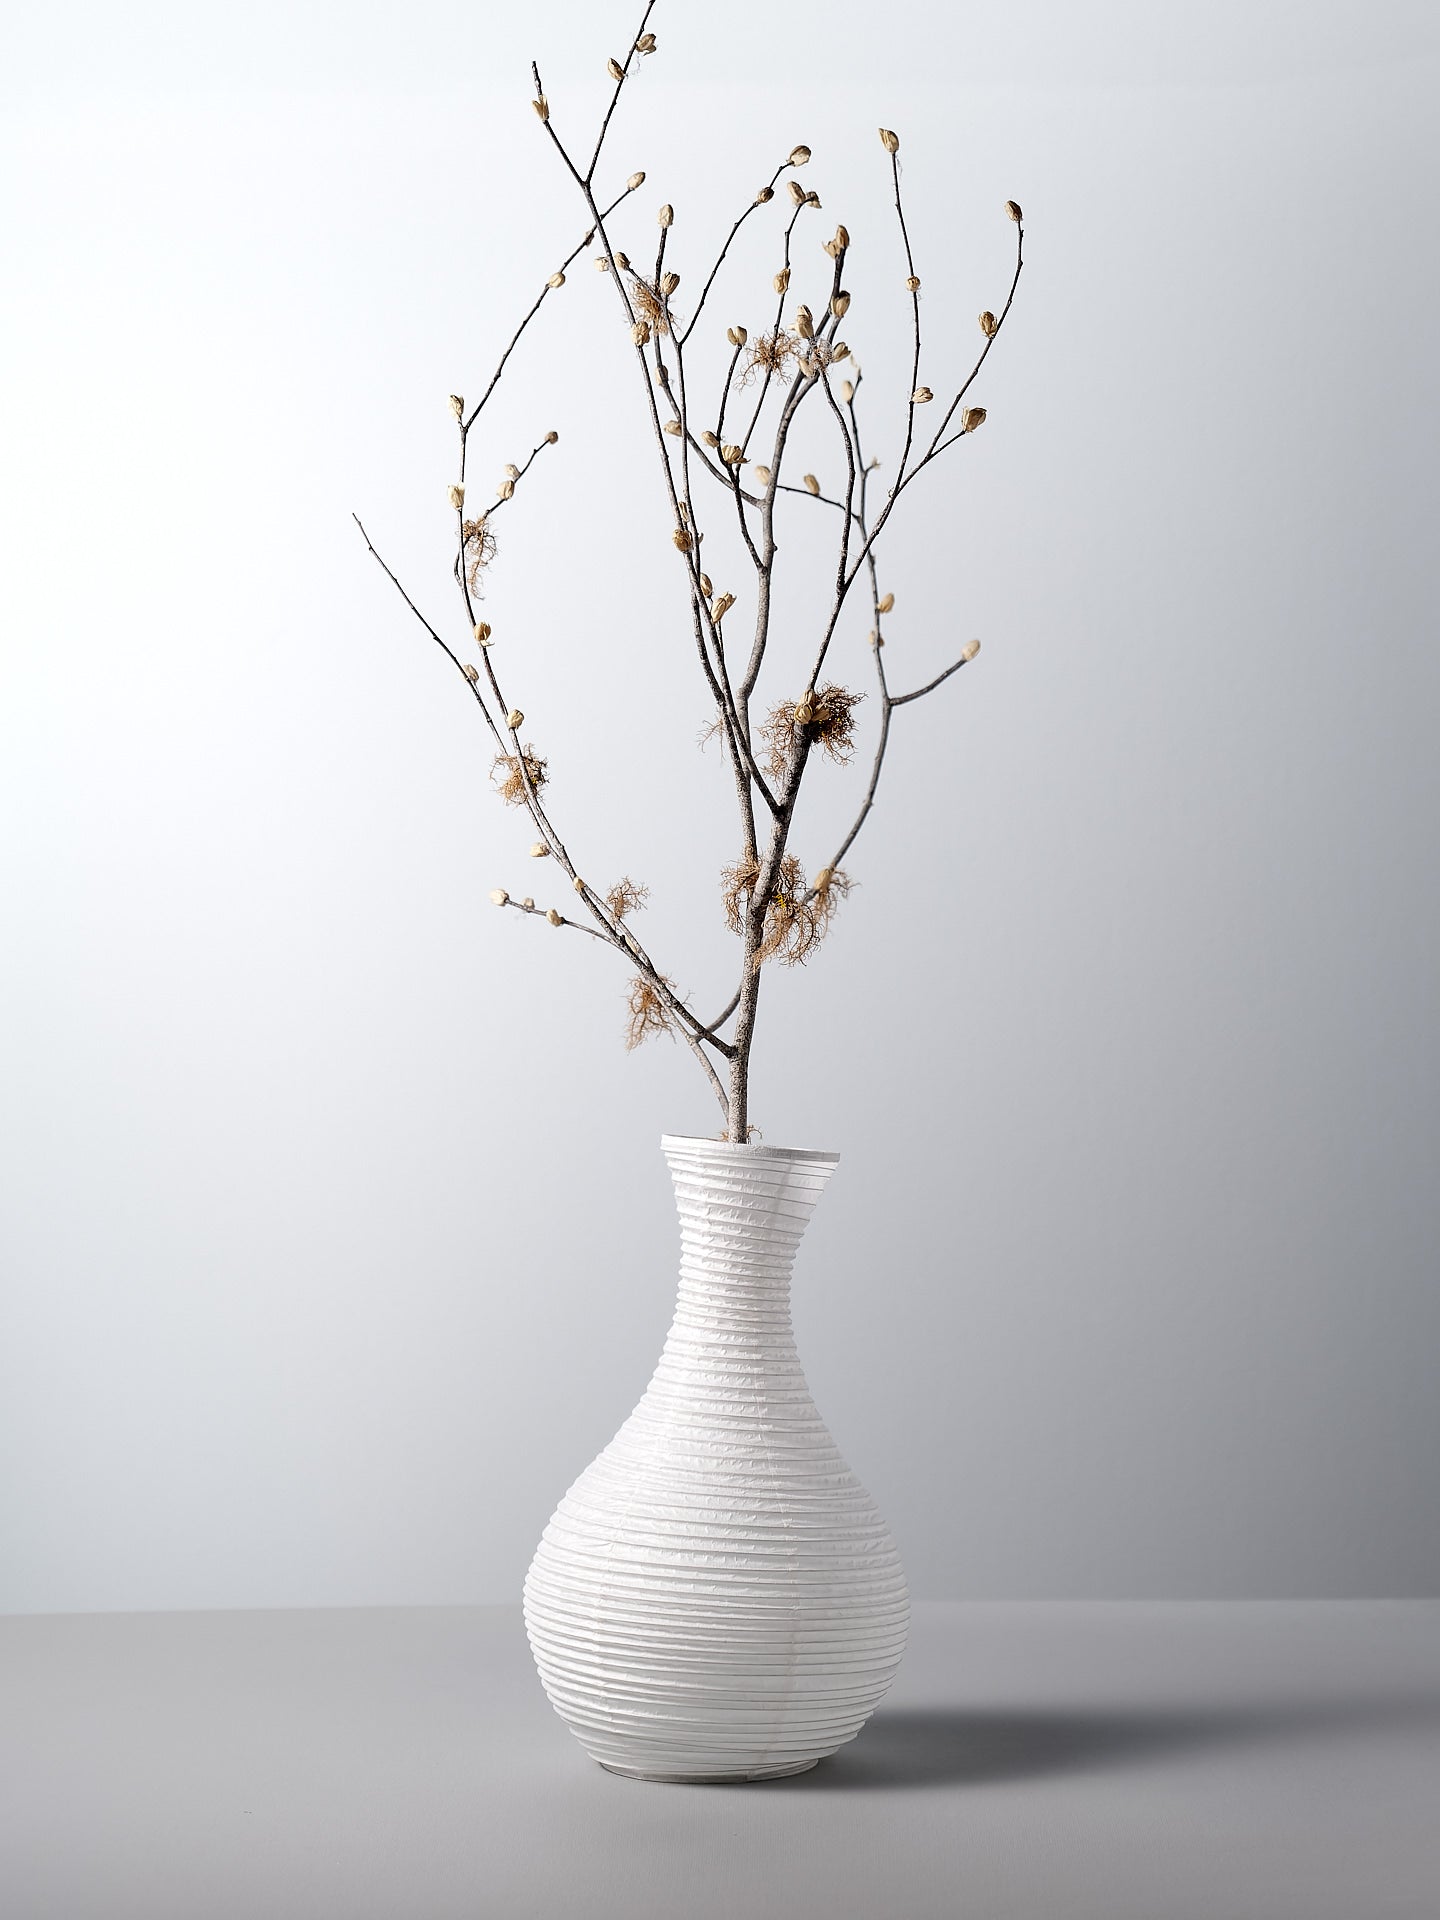 A Nobi-tsutsu Paper Vase - №5 by Hayashi Kougei with a branch in it.